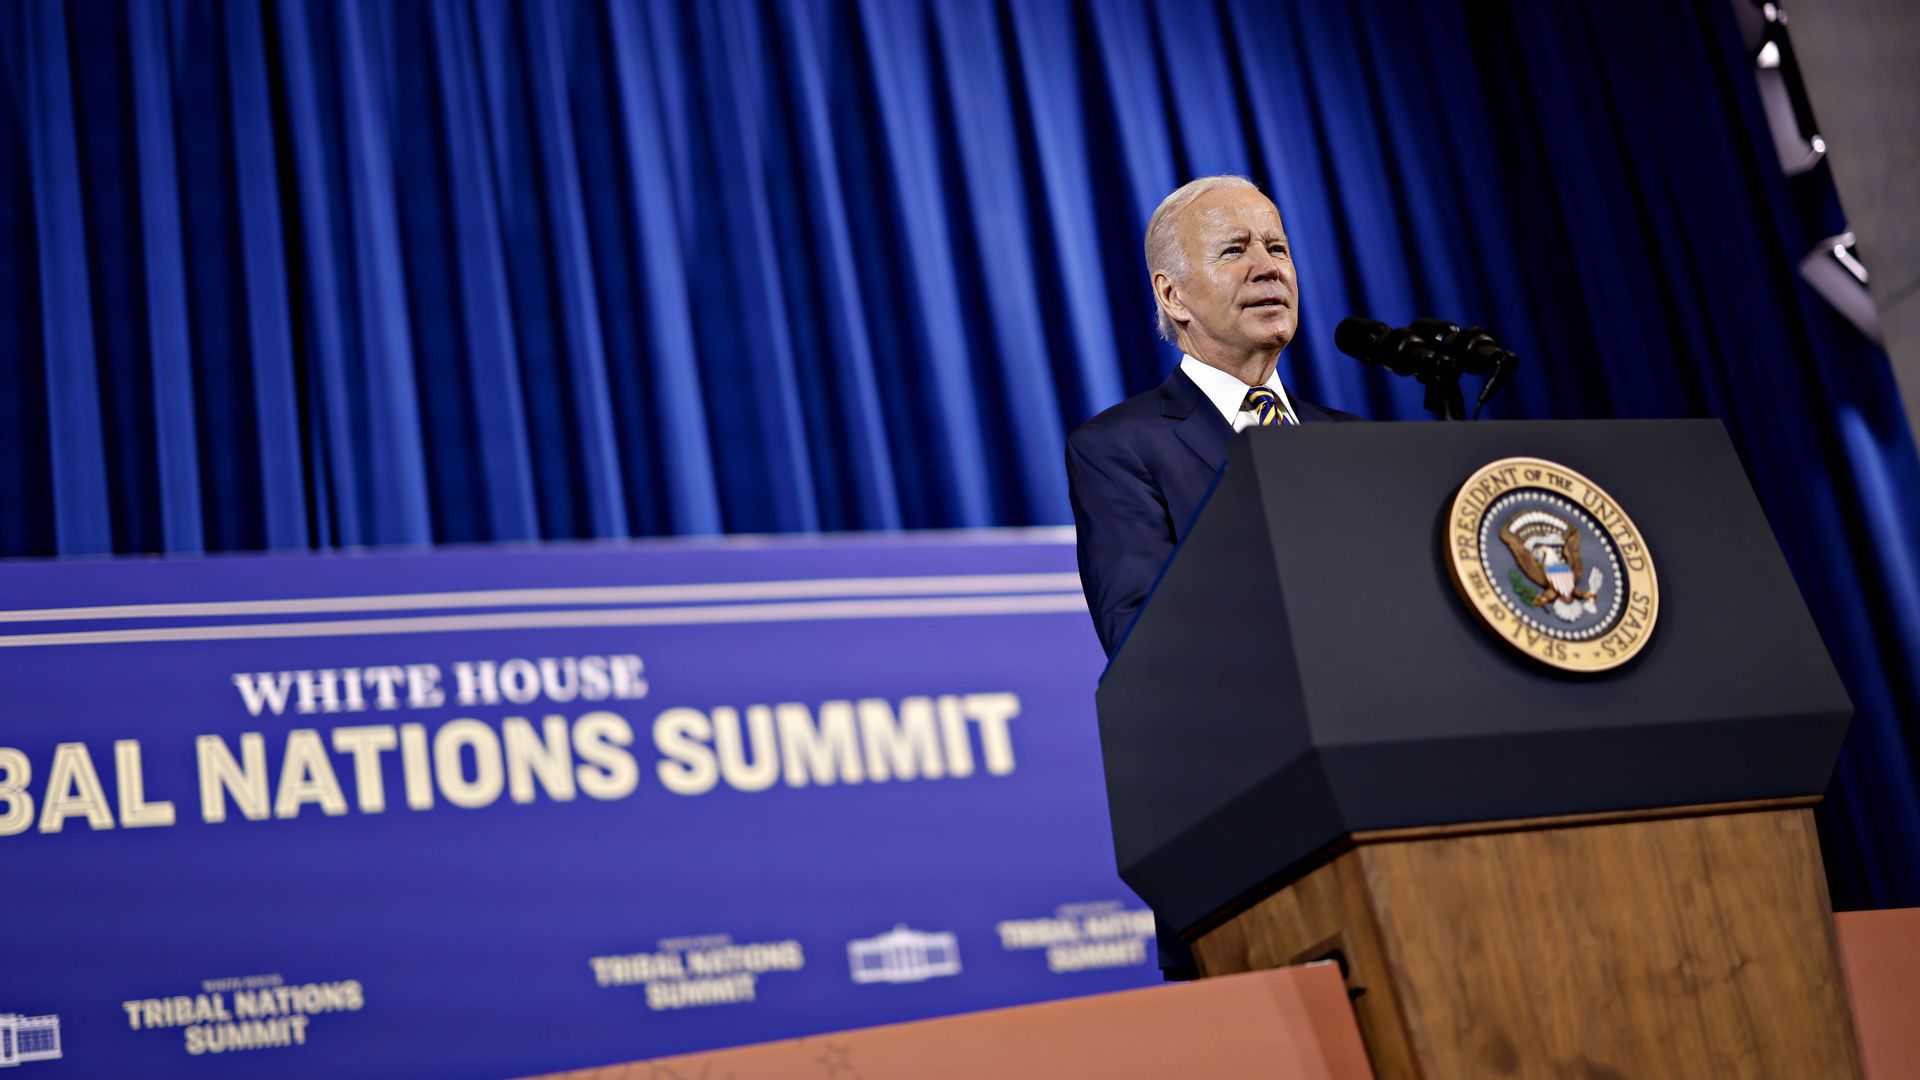 President Biden speaking at the White House Tribal Nations Summit at the Department of the Interior in Washington, D.C., on Nov. 30.